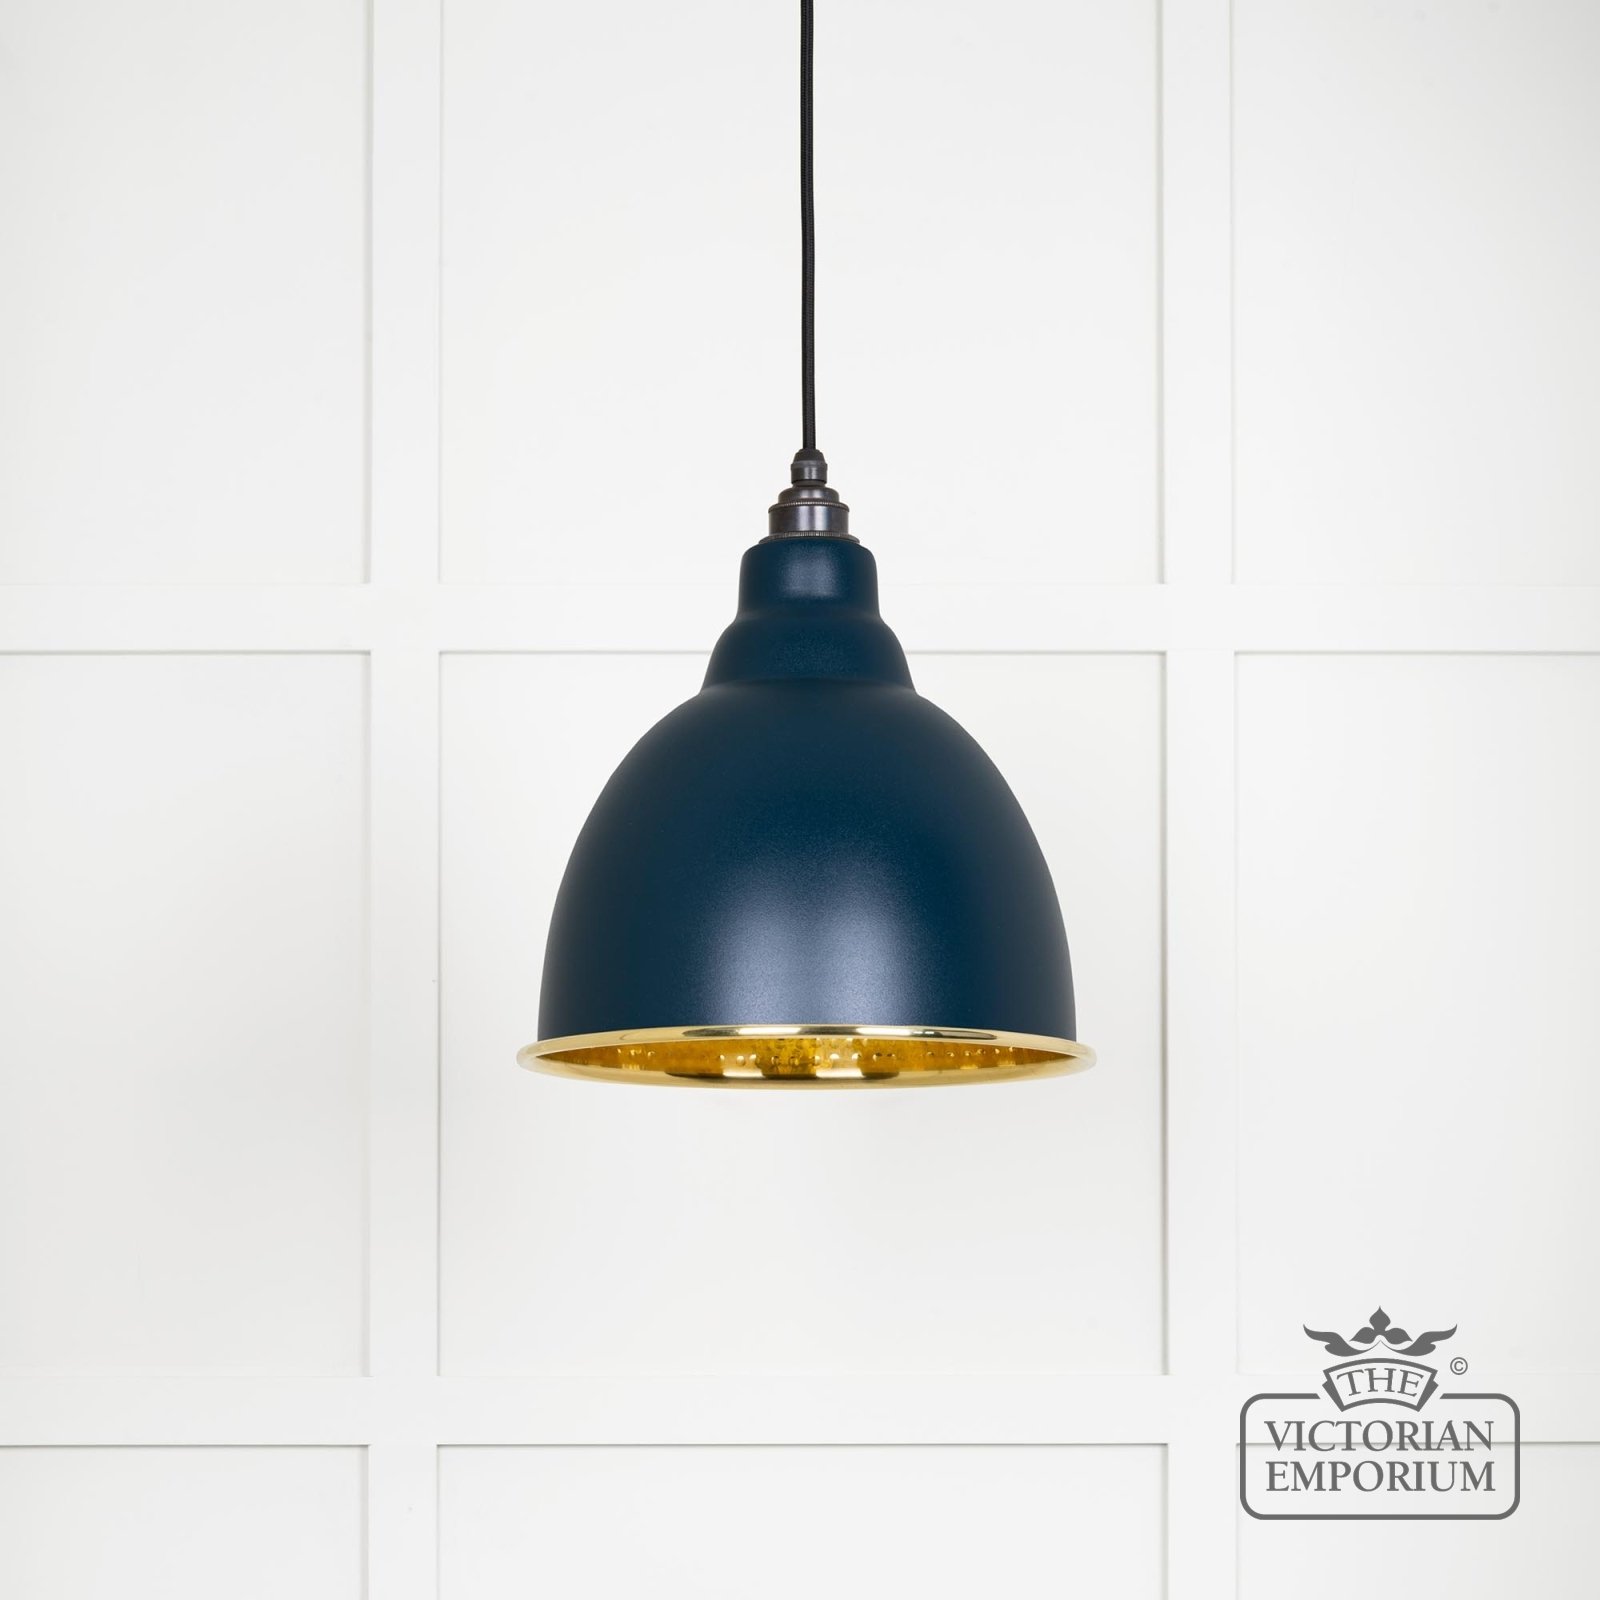 Brindle pendant light in Dusk with hammered brass interior